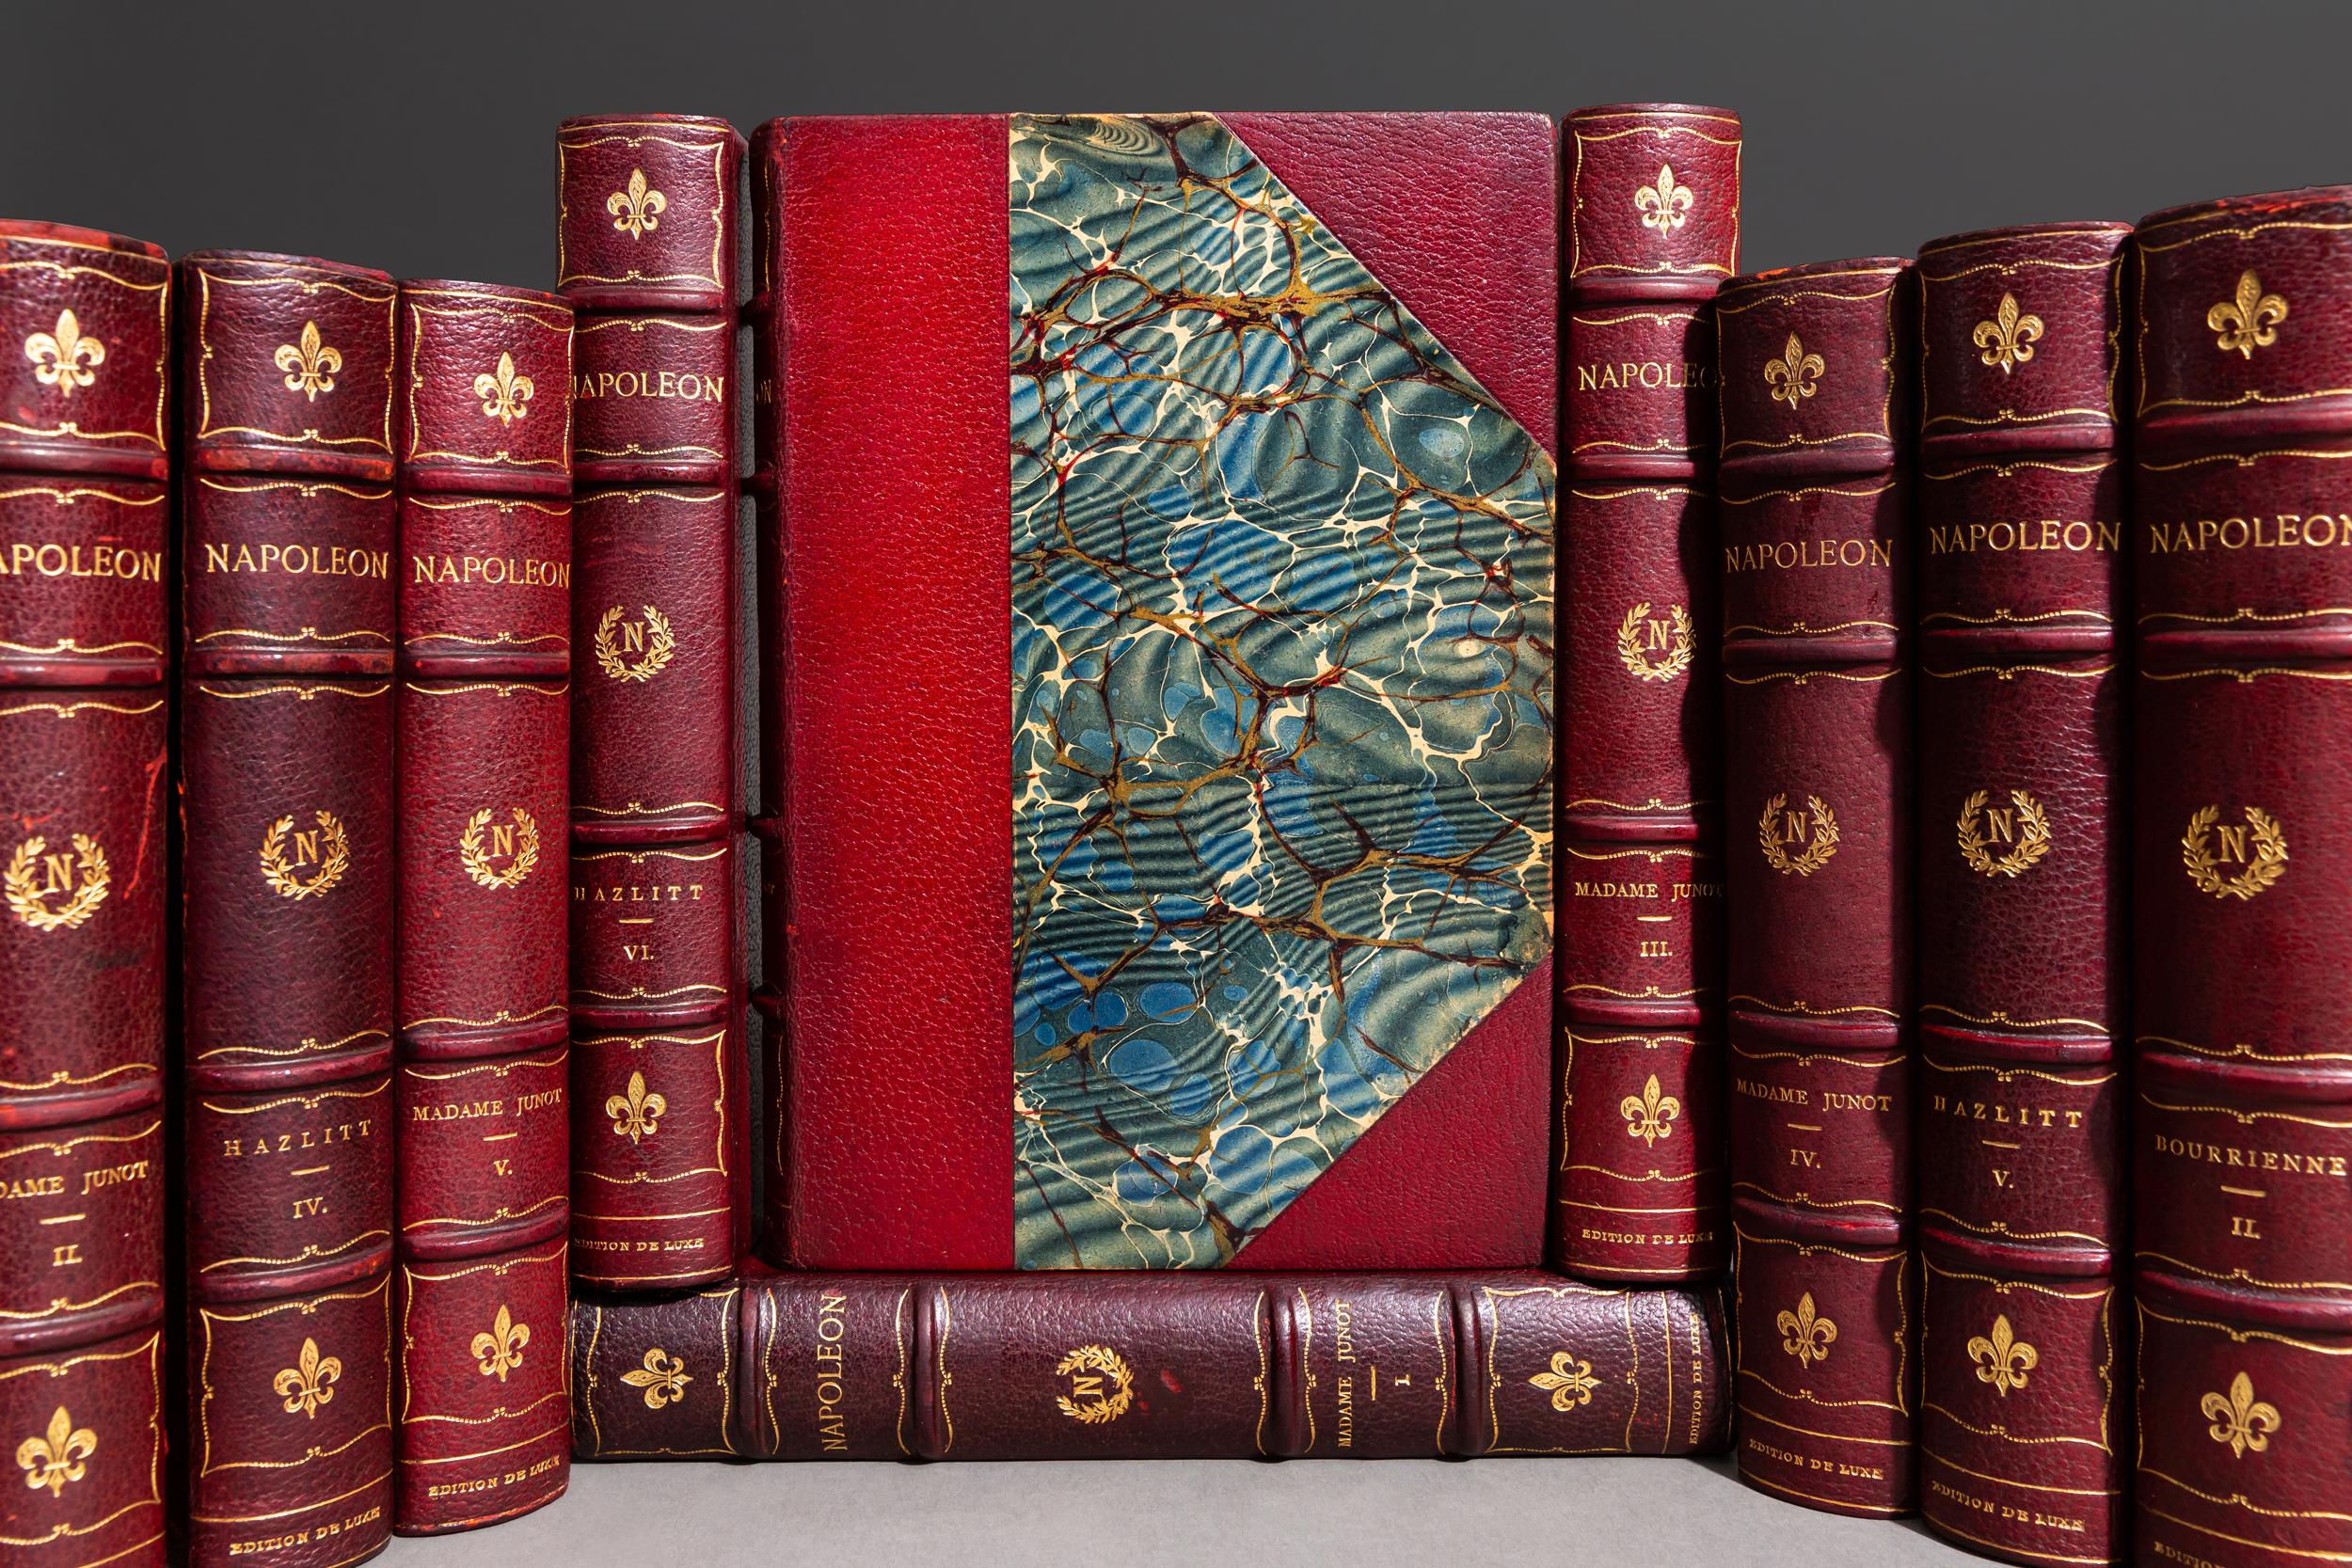 16 Volumes. Hazlitt, Junot & Bourrienne. The Lie of Napoleon. Edition Deluxe. Limited to 1080 copies, this is #675. Bound in 3/4 red morocco, marbled boards. Marbled endpapers, top edges gilt, raised bands, gilt panels. Illustrated colored